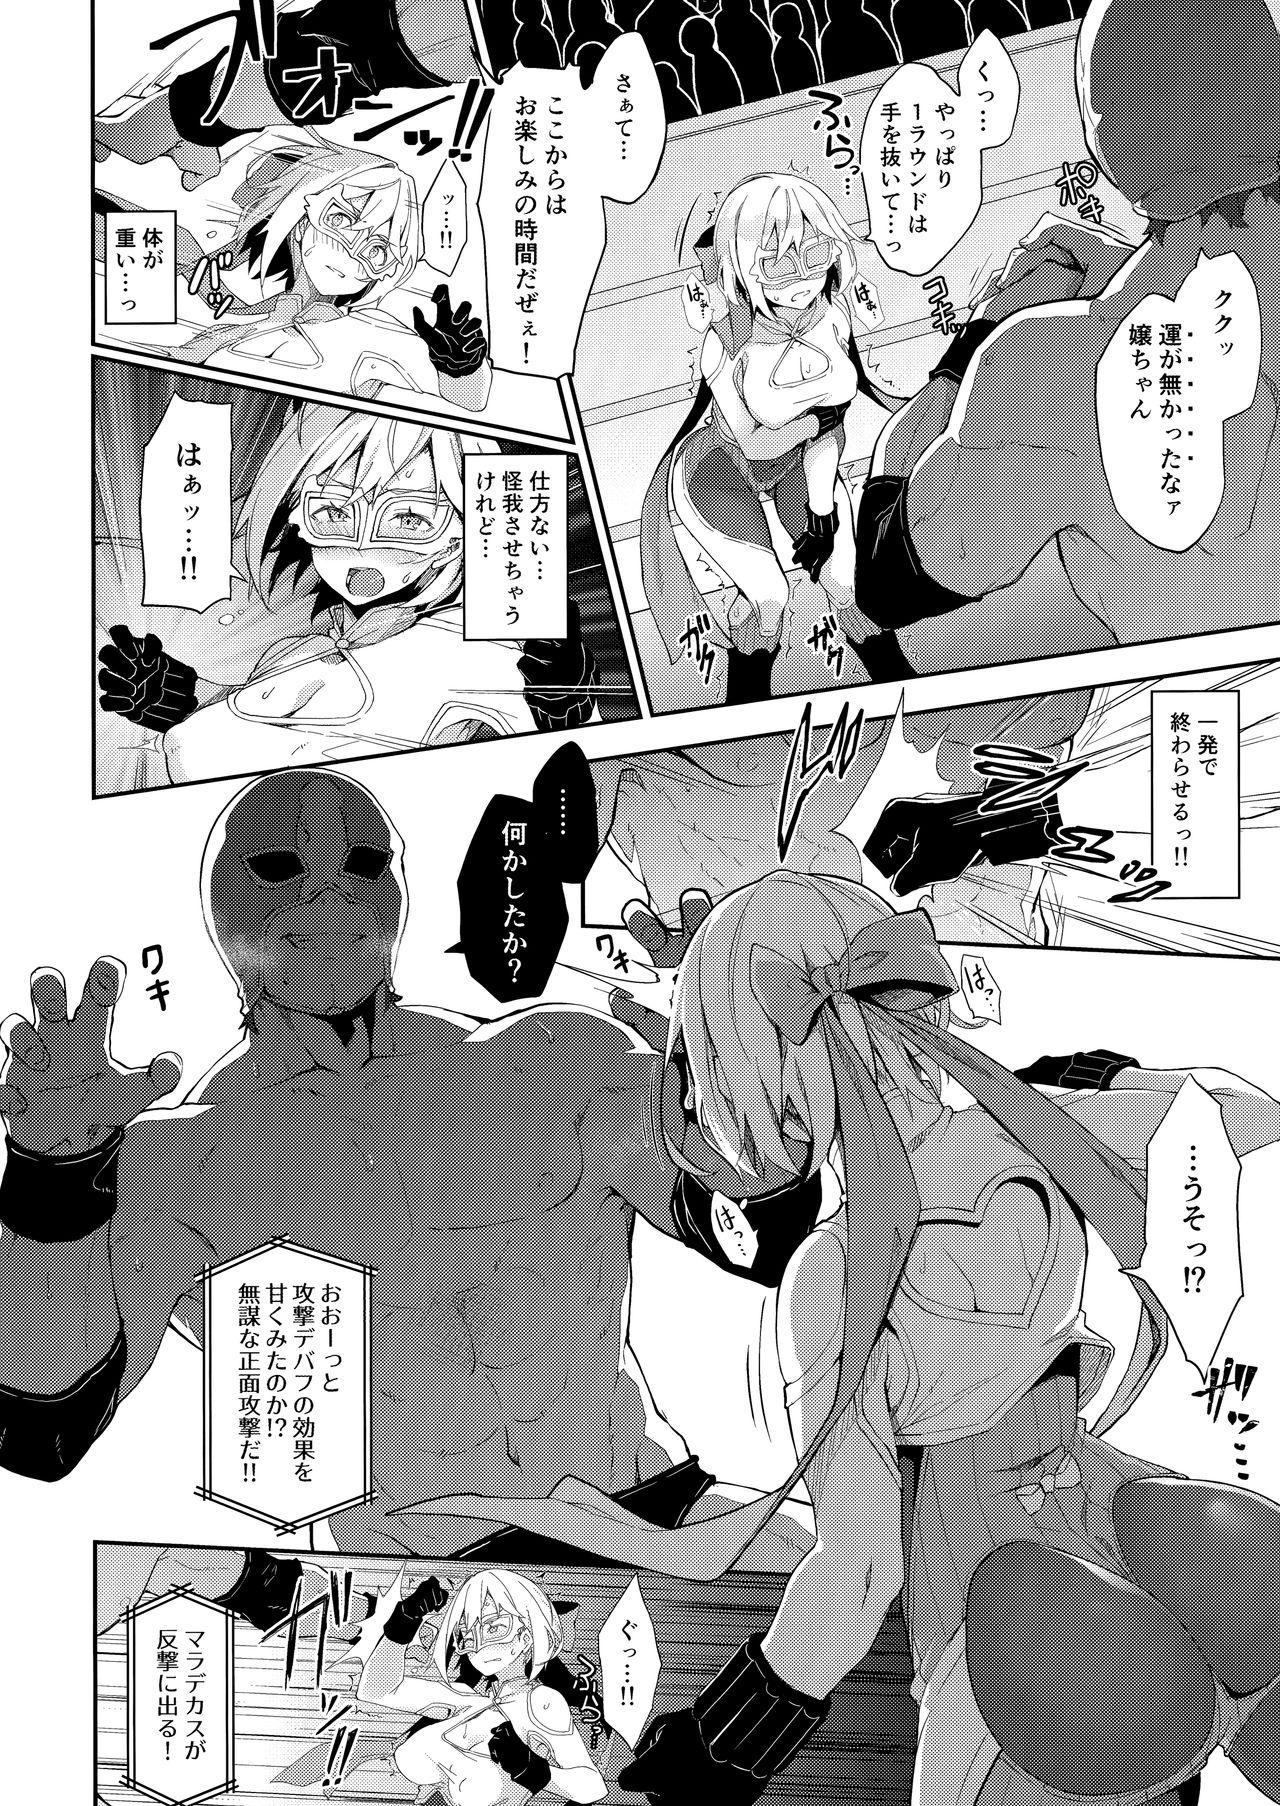 Old Young MANIAC+ - Granblue fantasy Cocks - Page 7